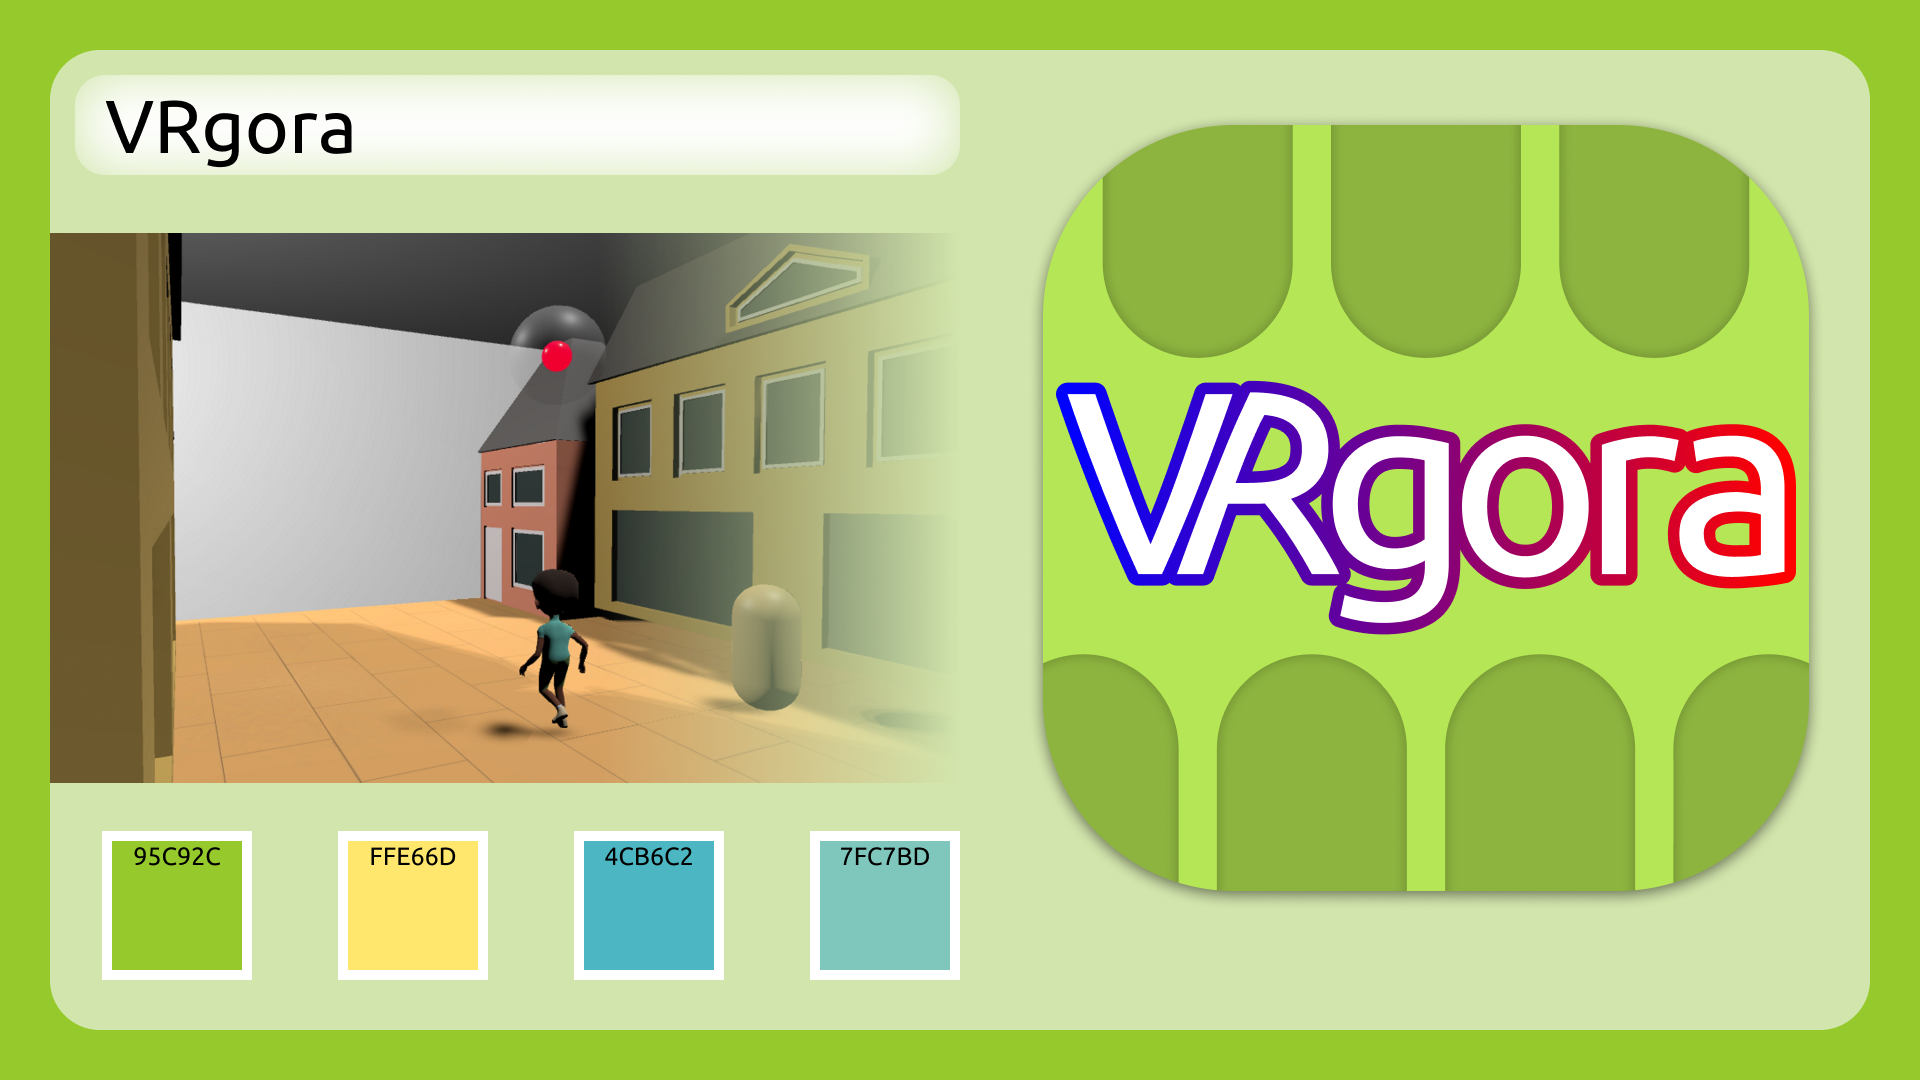 overview image of VRgora brand elements